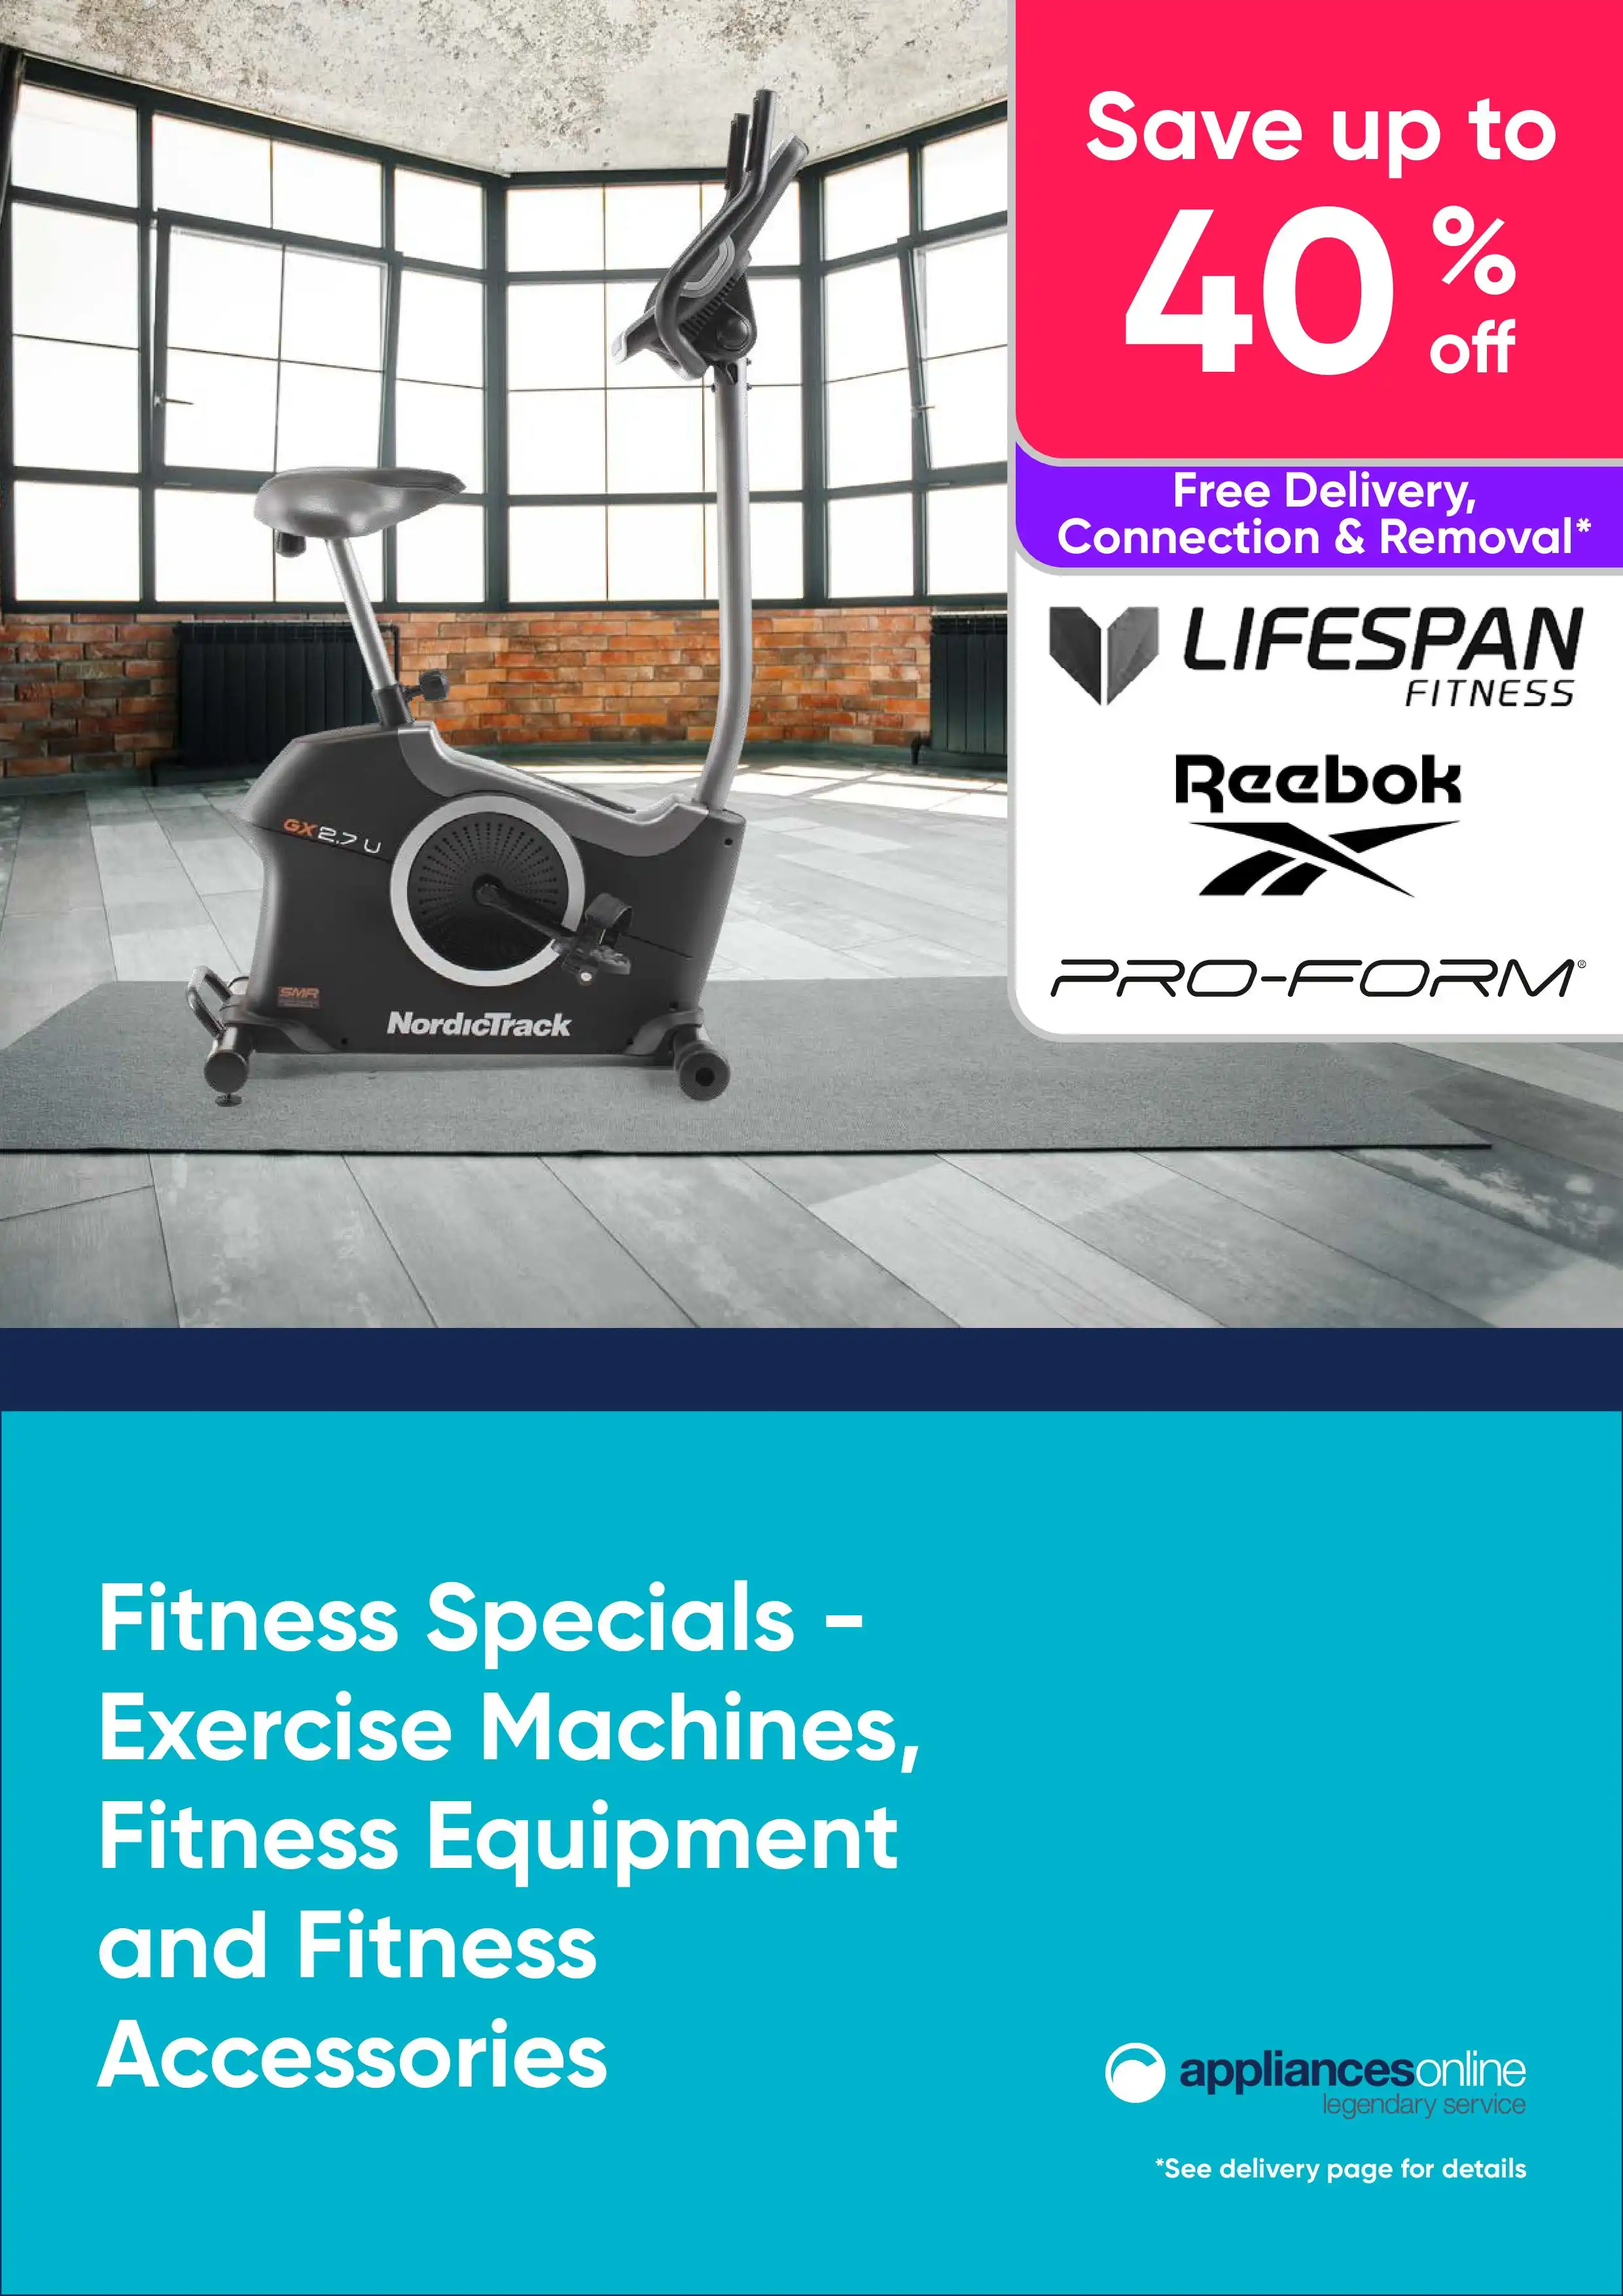 Appliances Online Fitness and Personal Care Specials - Save Up to 40% RRP On Exercise Machines